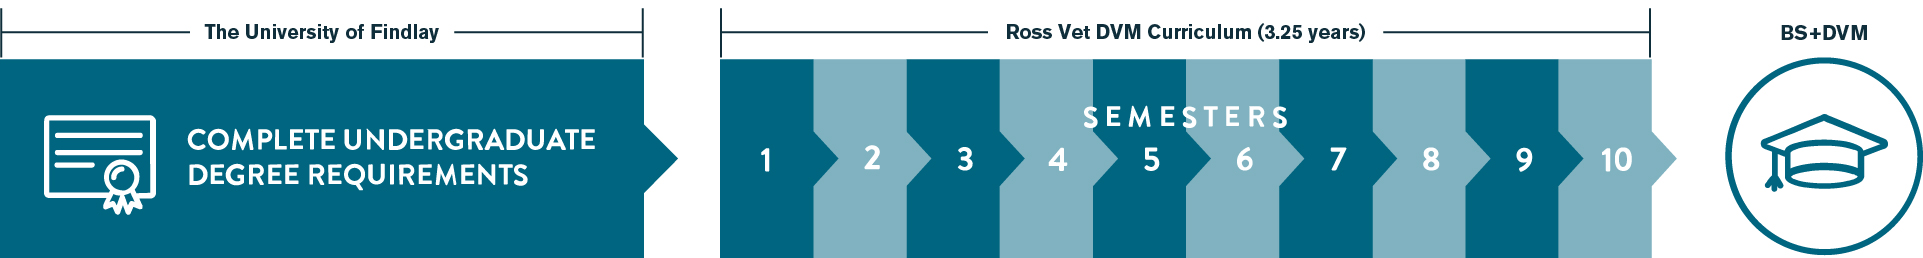 University of Findlay and Ross Vet curriculum timeline